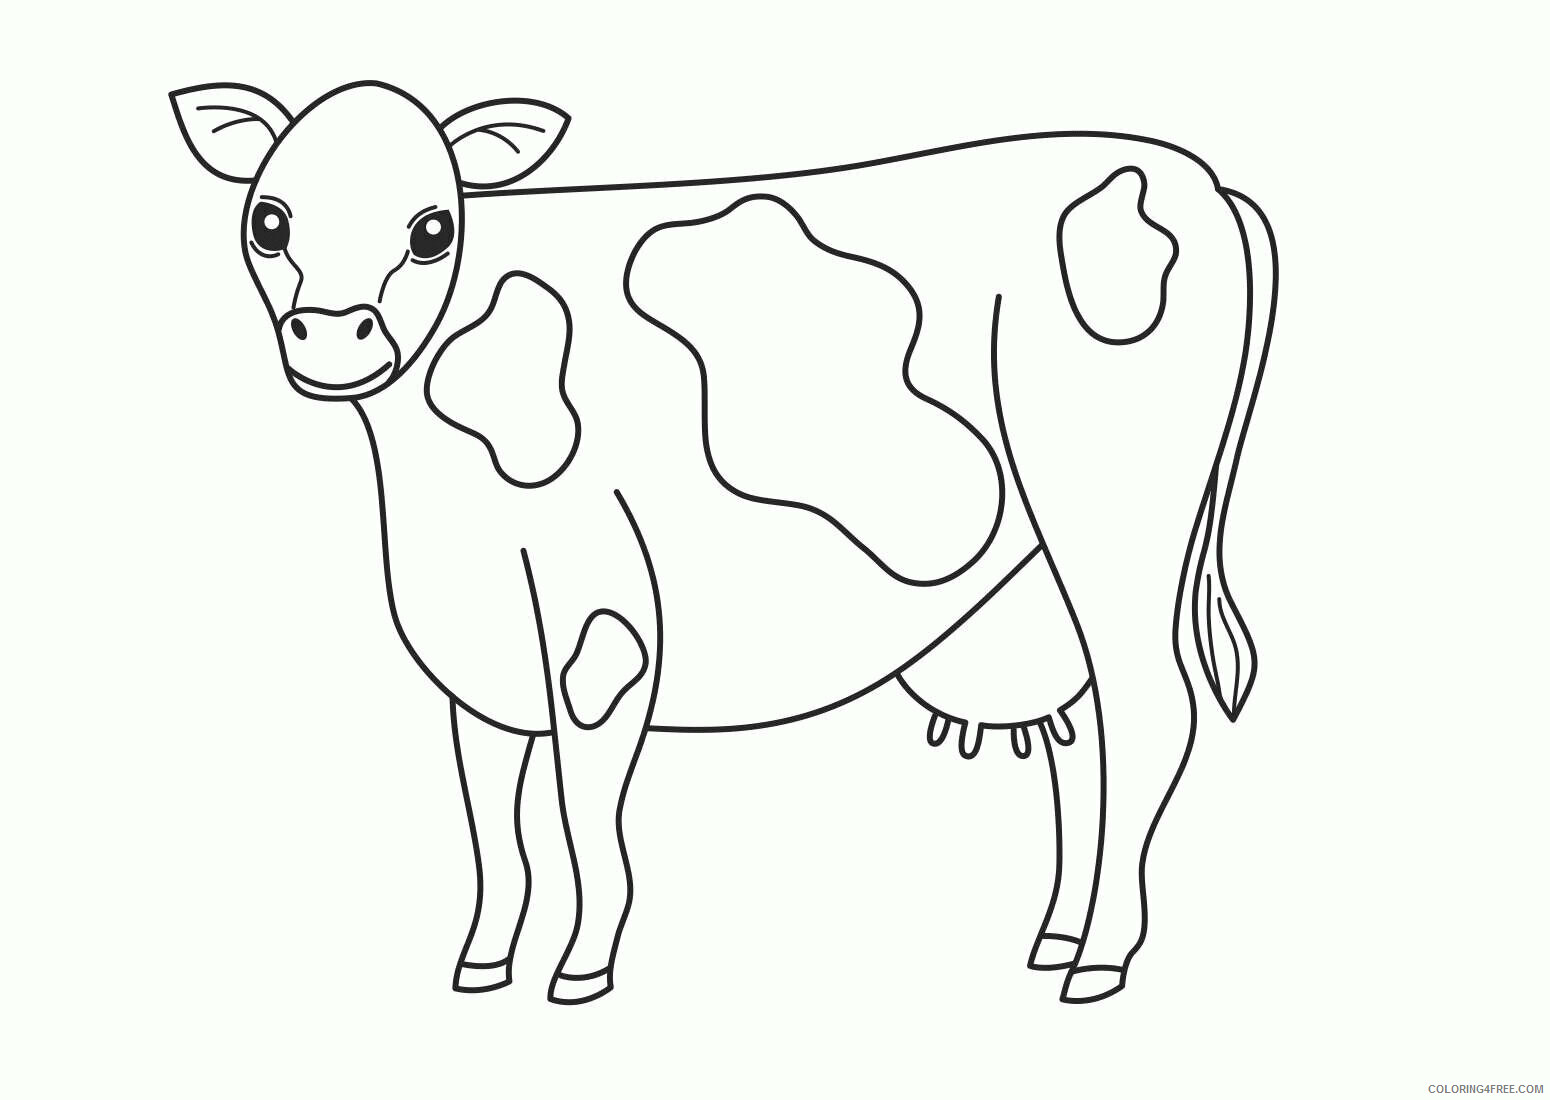 Cow Coloring Sheets Animal Coloring Pages Printable 2021 0957 Coloring4free Coloring4free Com